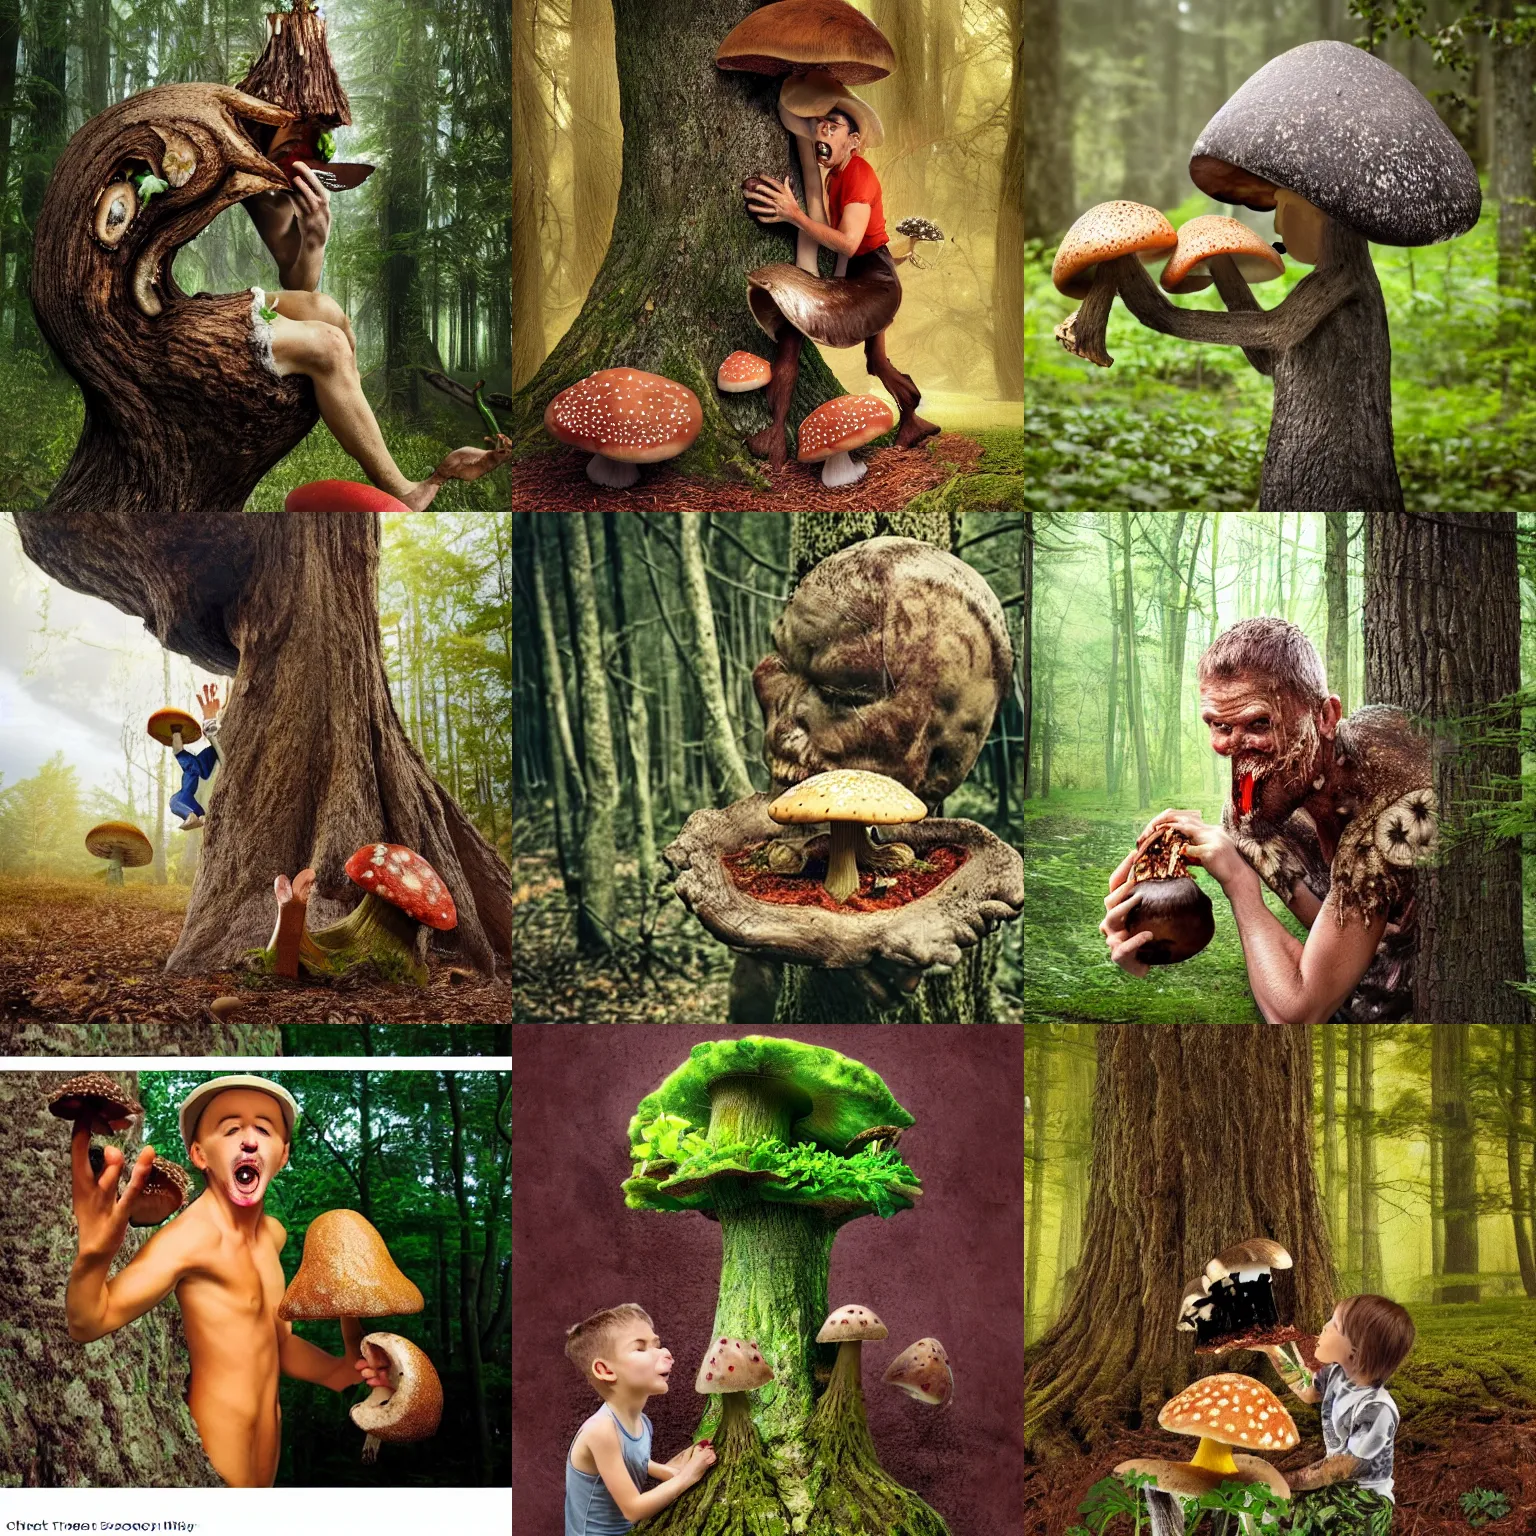 Prompt: photograph of a hungry treant savagely eating a mushroom man